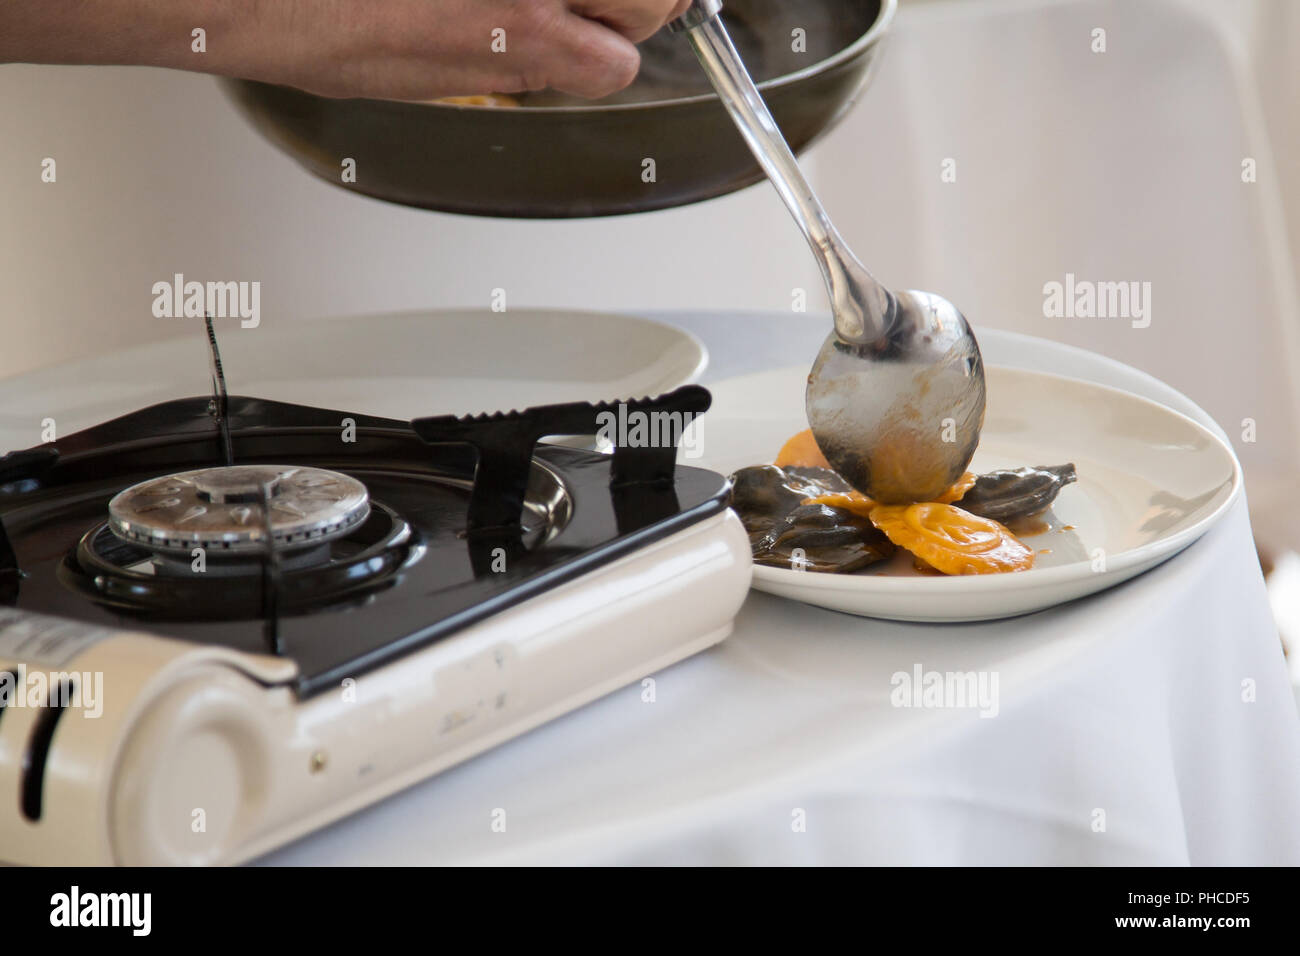 Cooking a ravioli in restaurant at masterclass Stock Photo